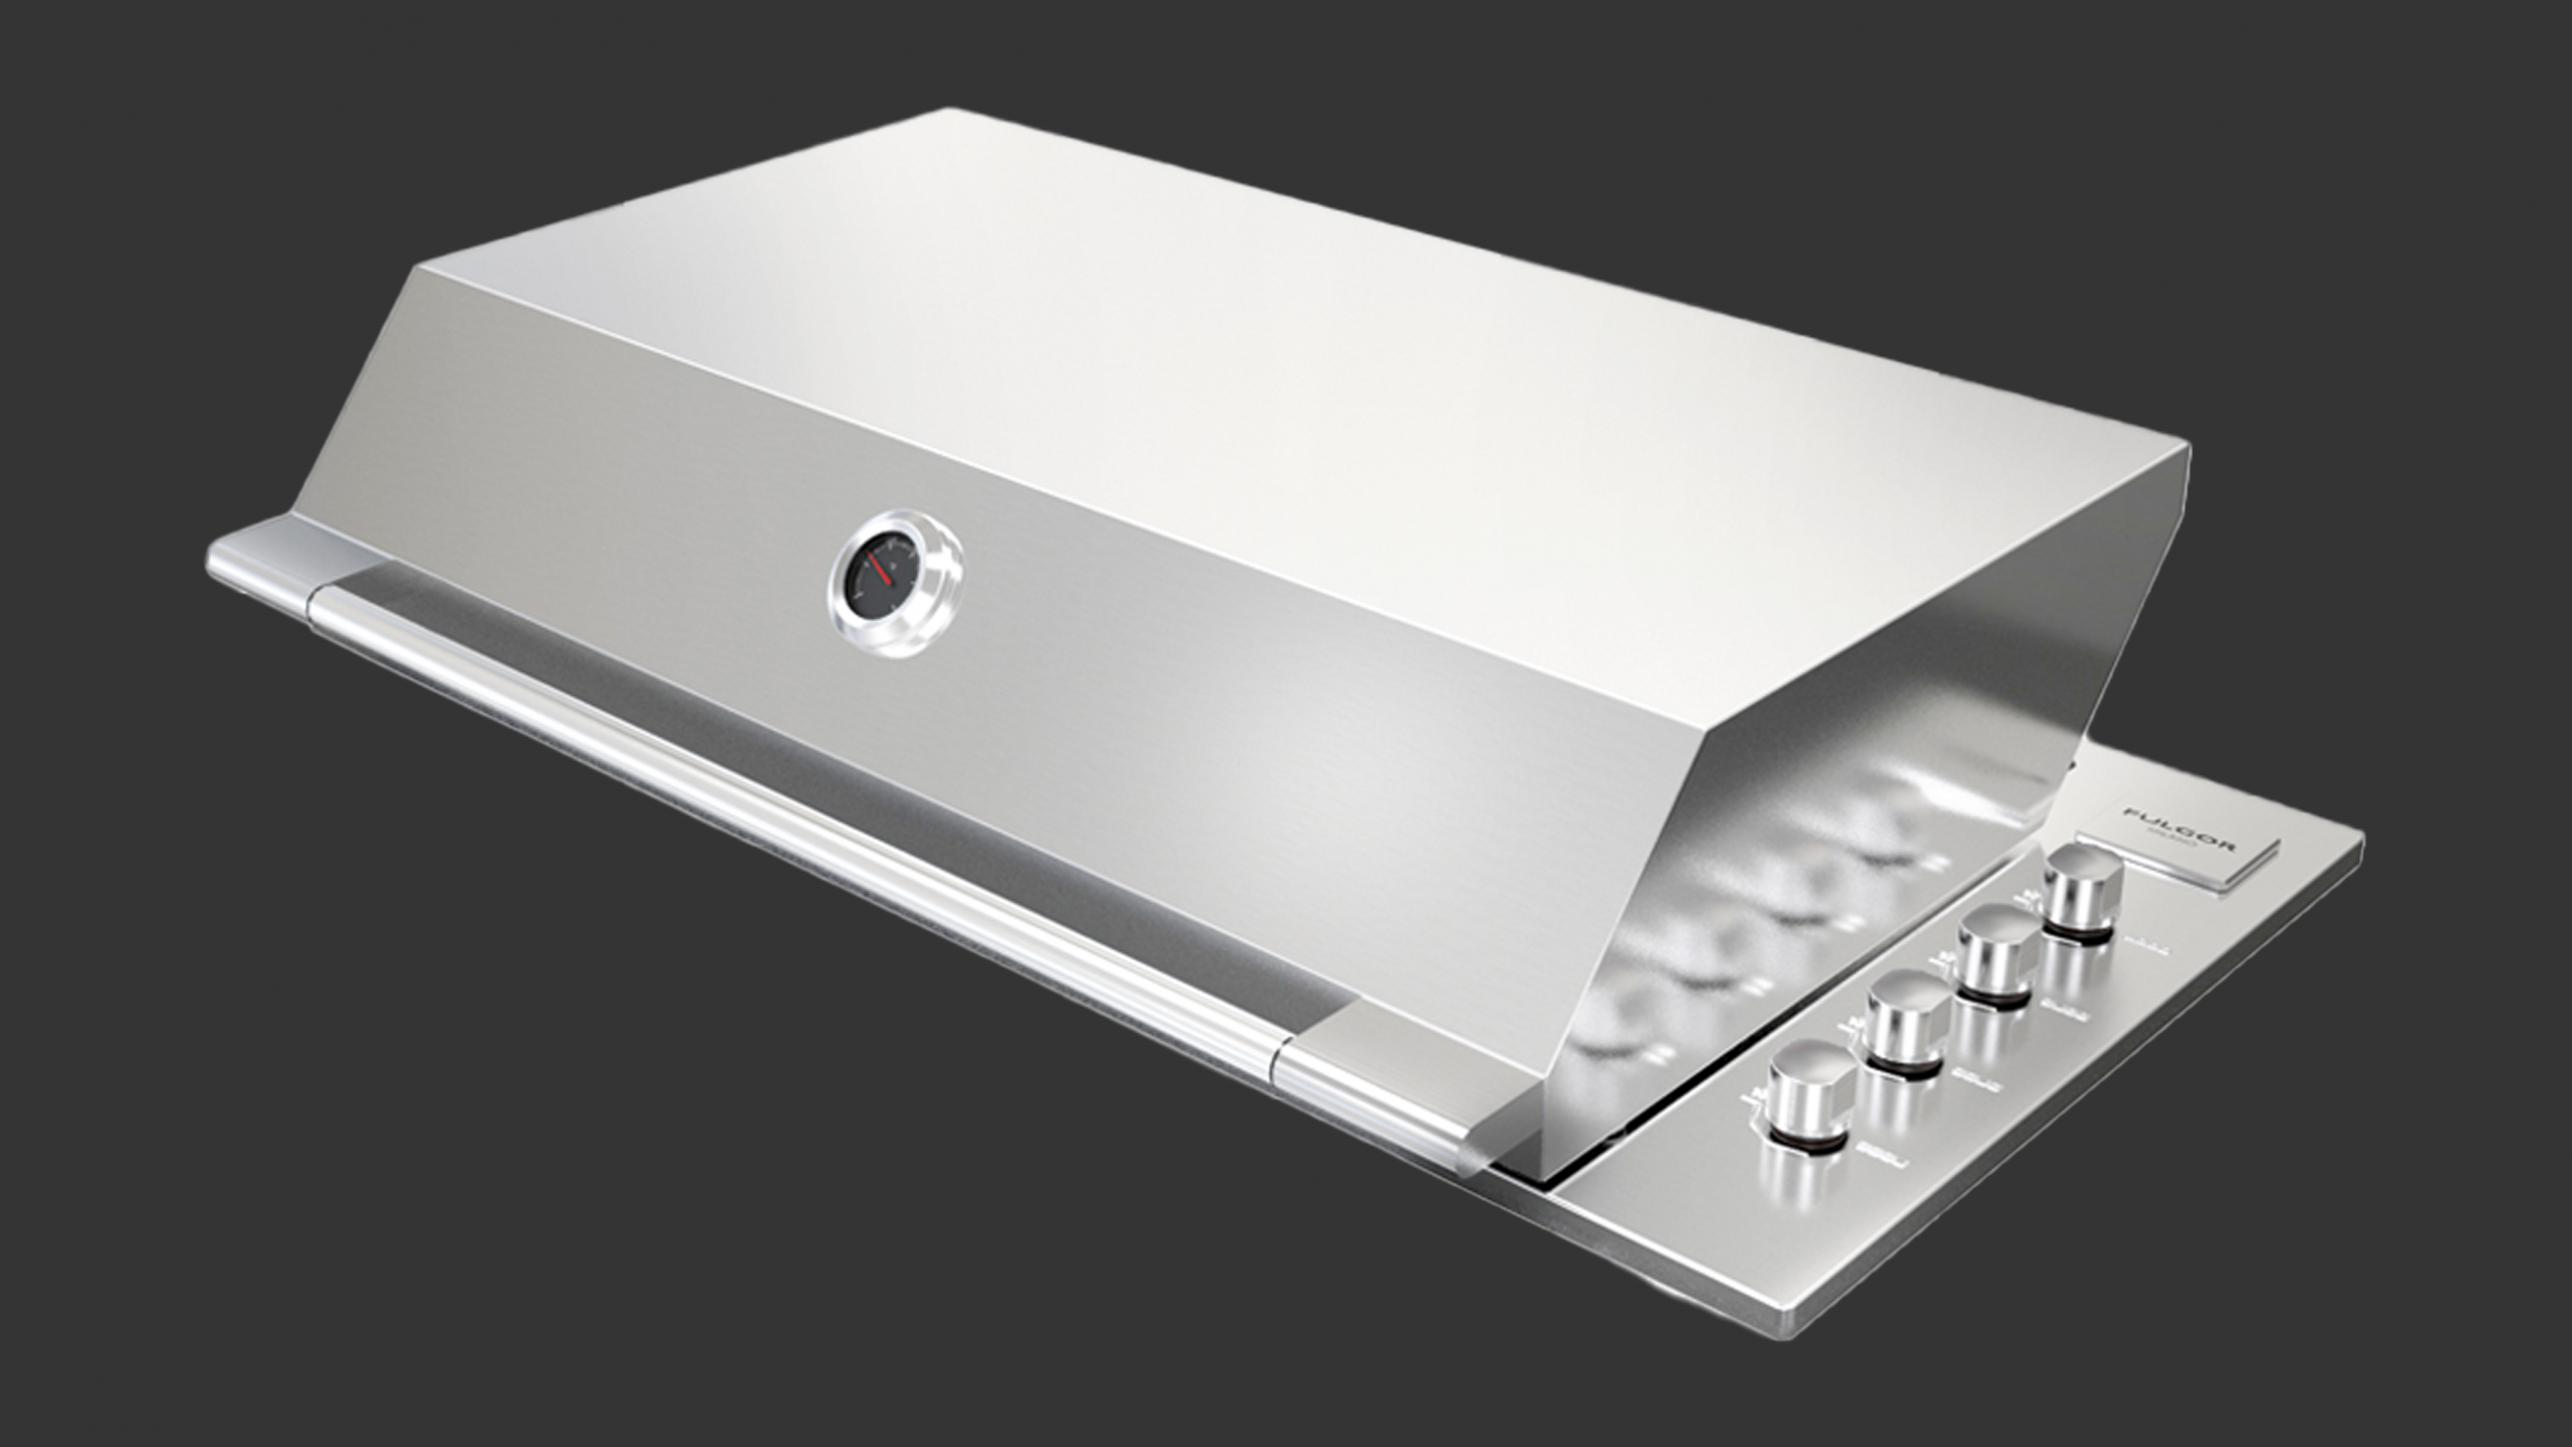 FOBQ HL 1000 X - Product Image